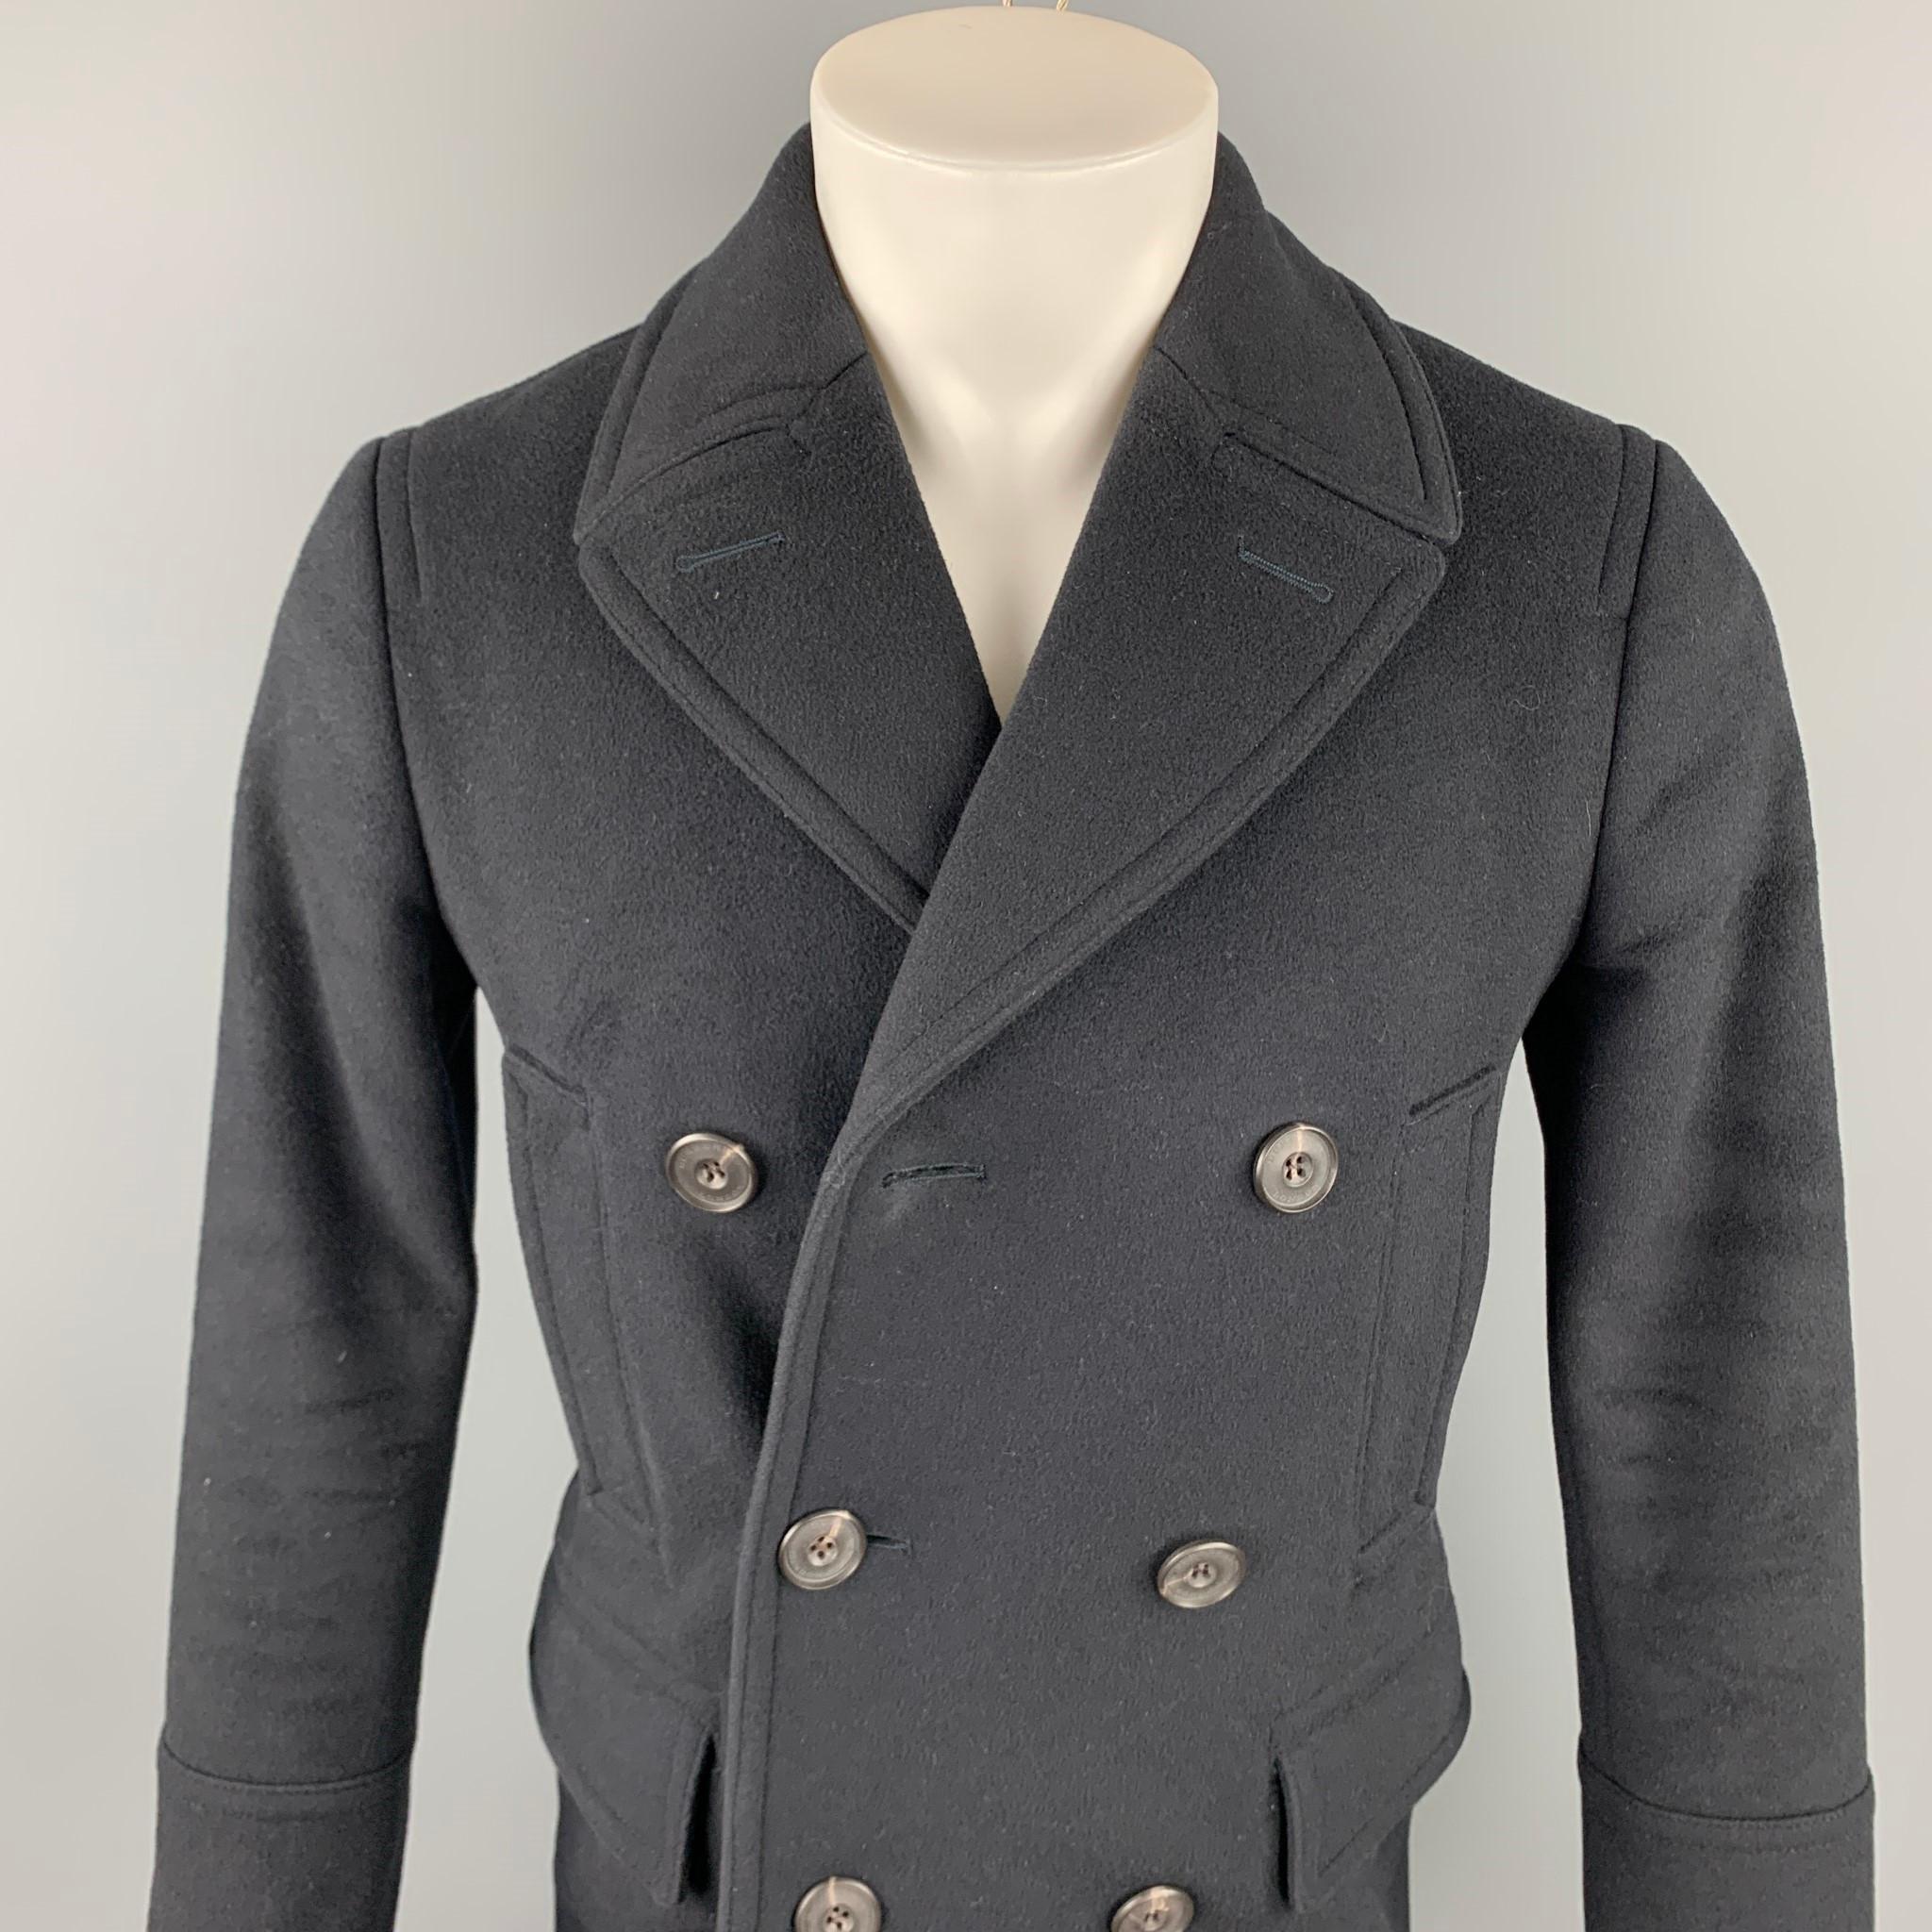 BURBERRY LONDON peacoat comes in a black wool with a full liner featuring front pockets, back buttoned, and a double breasted closure. 

Good Pre-Owned Condition.
Marked: No size tag
Original Retail Price: $1,595.00

Measurements:

Shoulder: 17